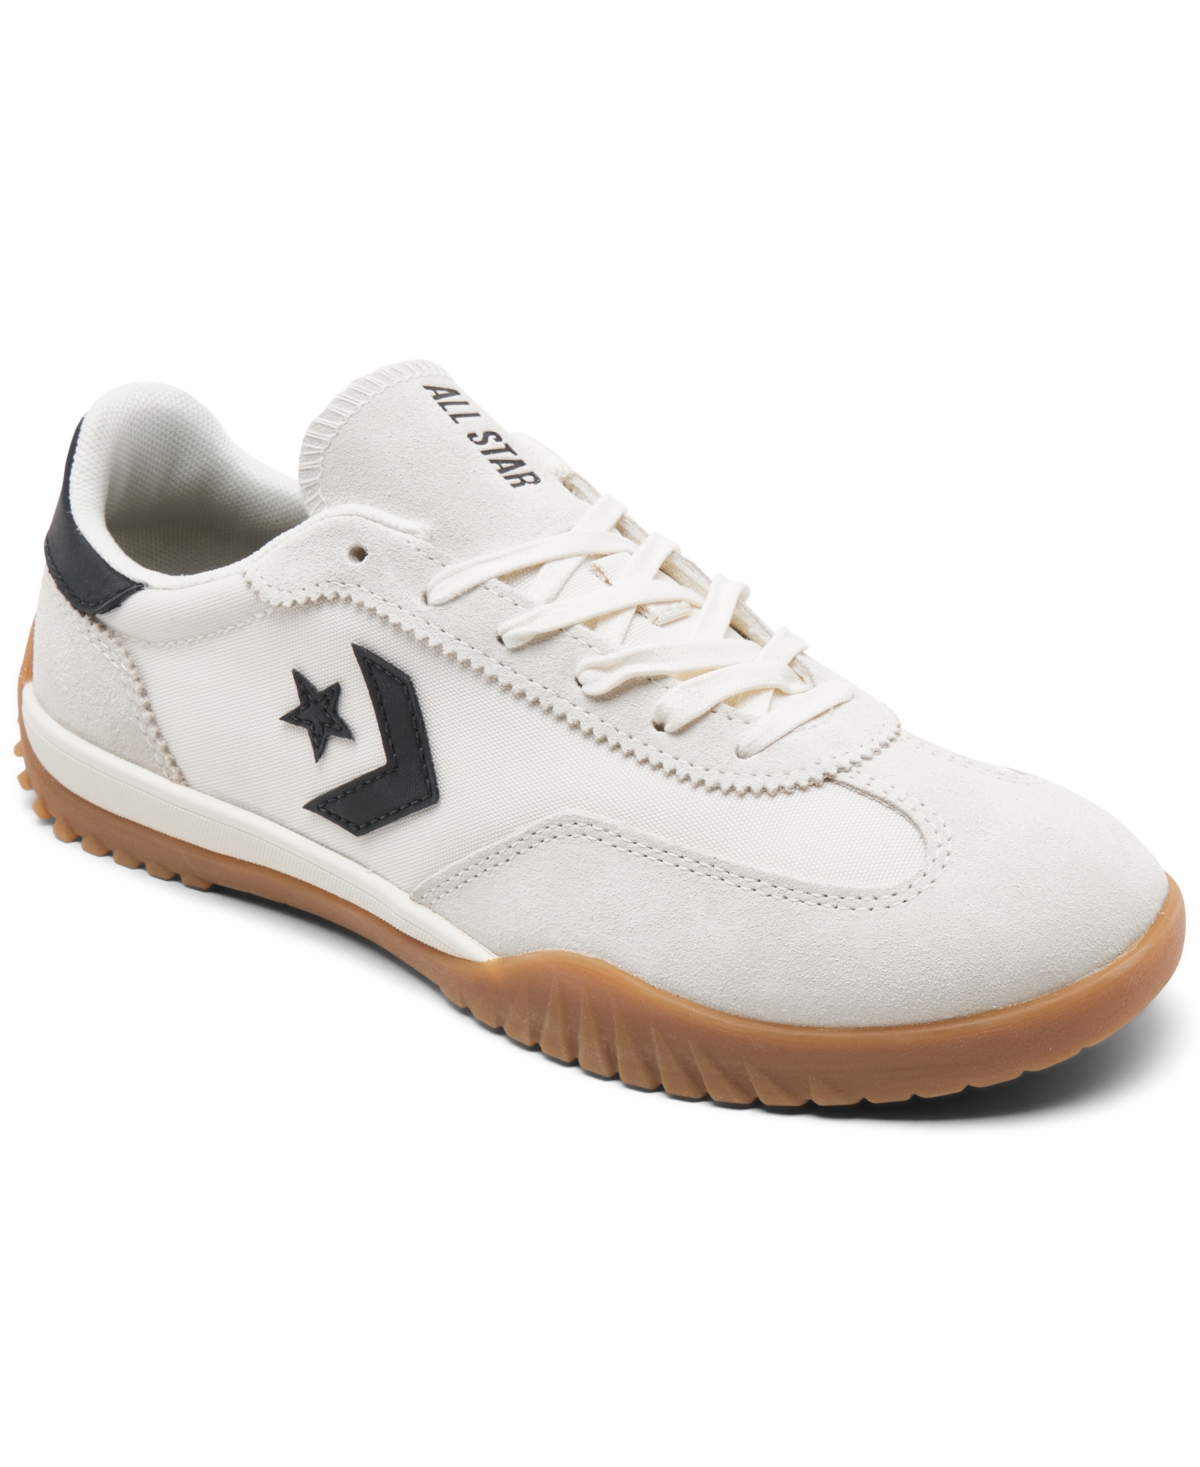 Women's Run Star Trainer Casual Sneakers from Finish Line - Honey